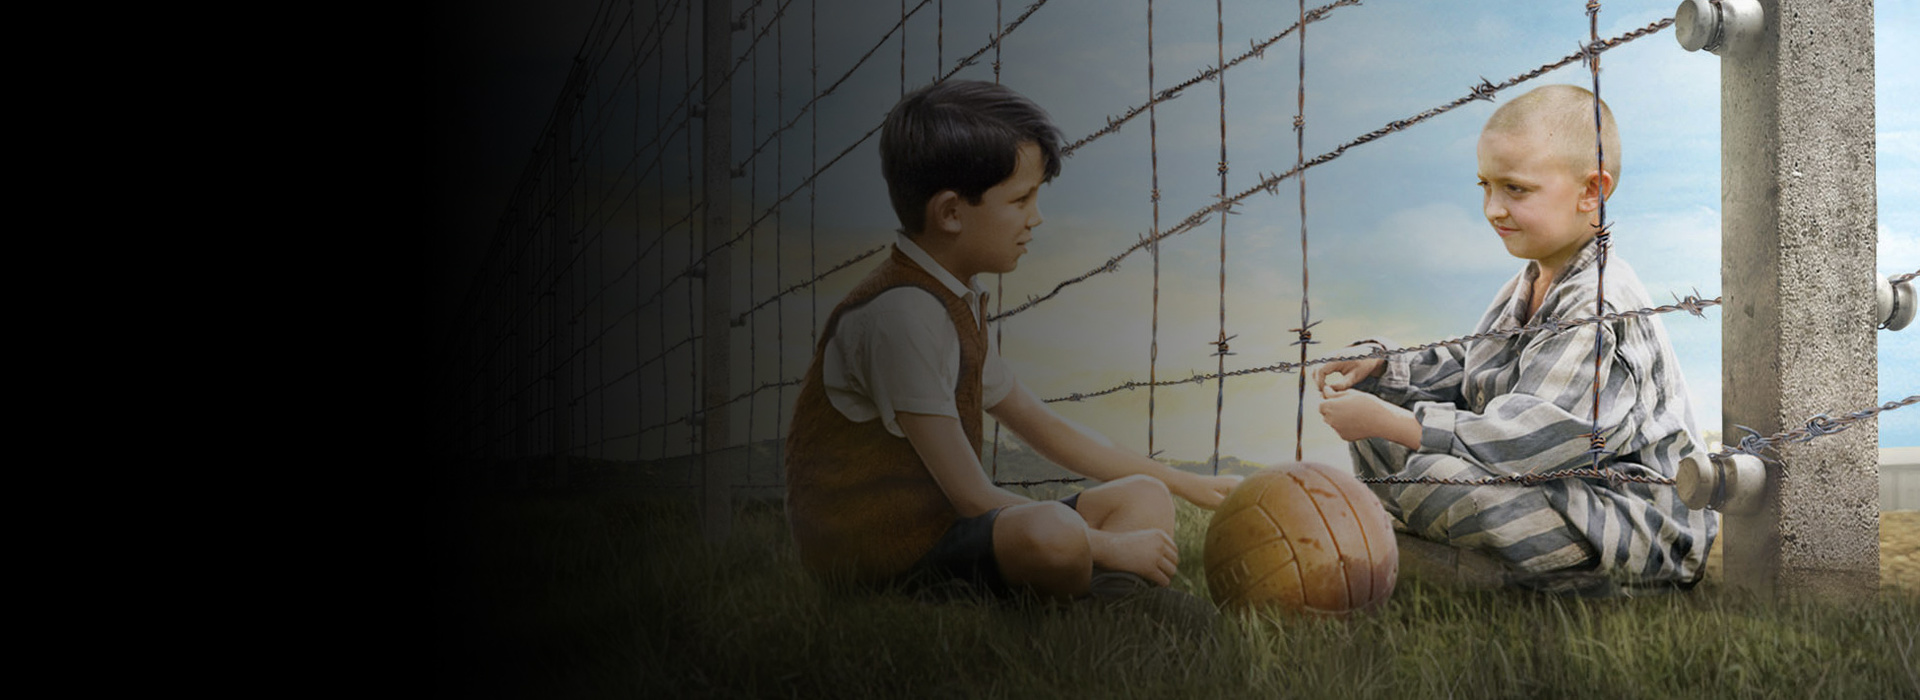 Movie poster The Boy in the Striped Pyjamas